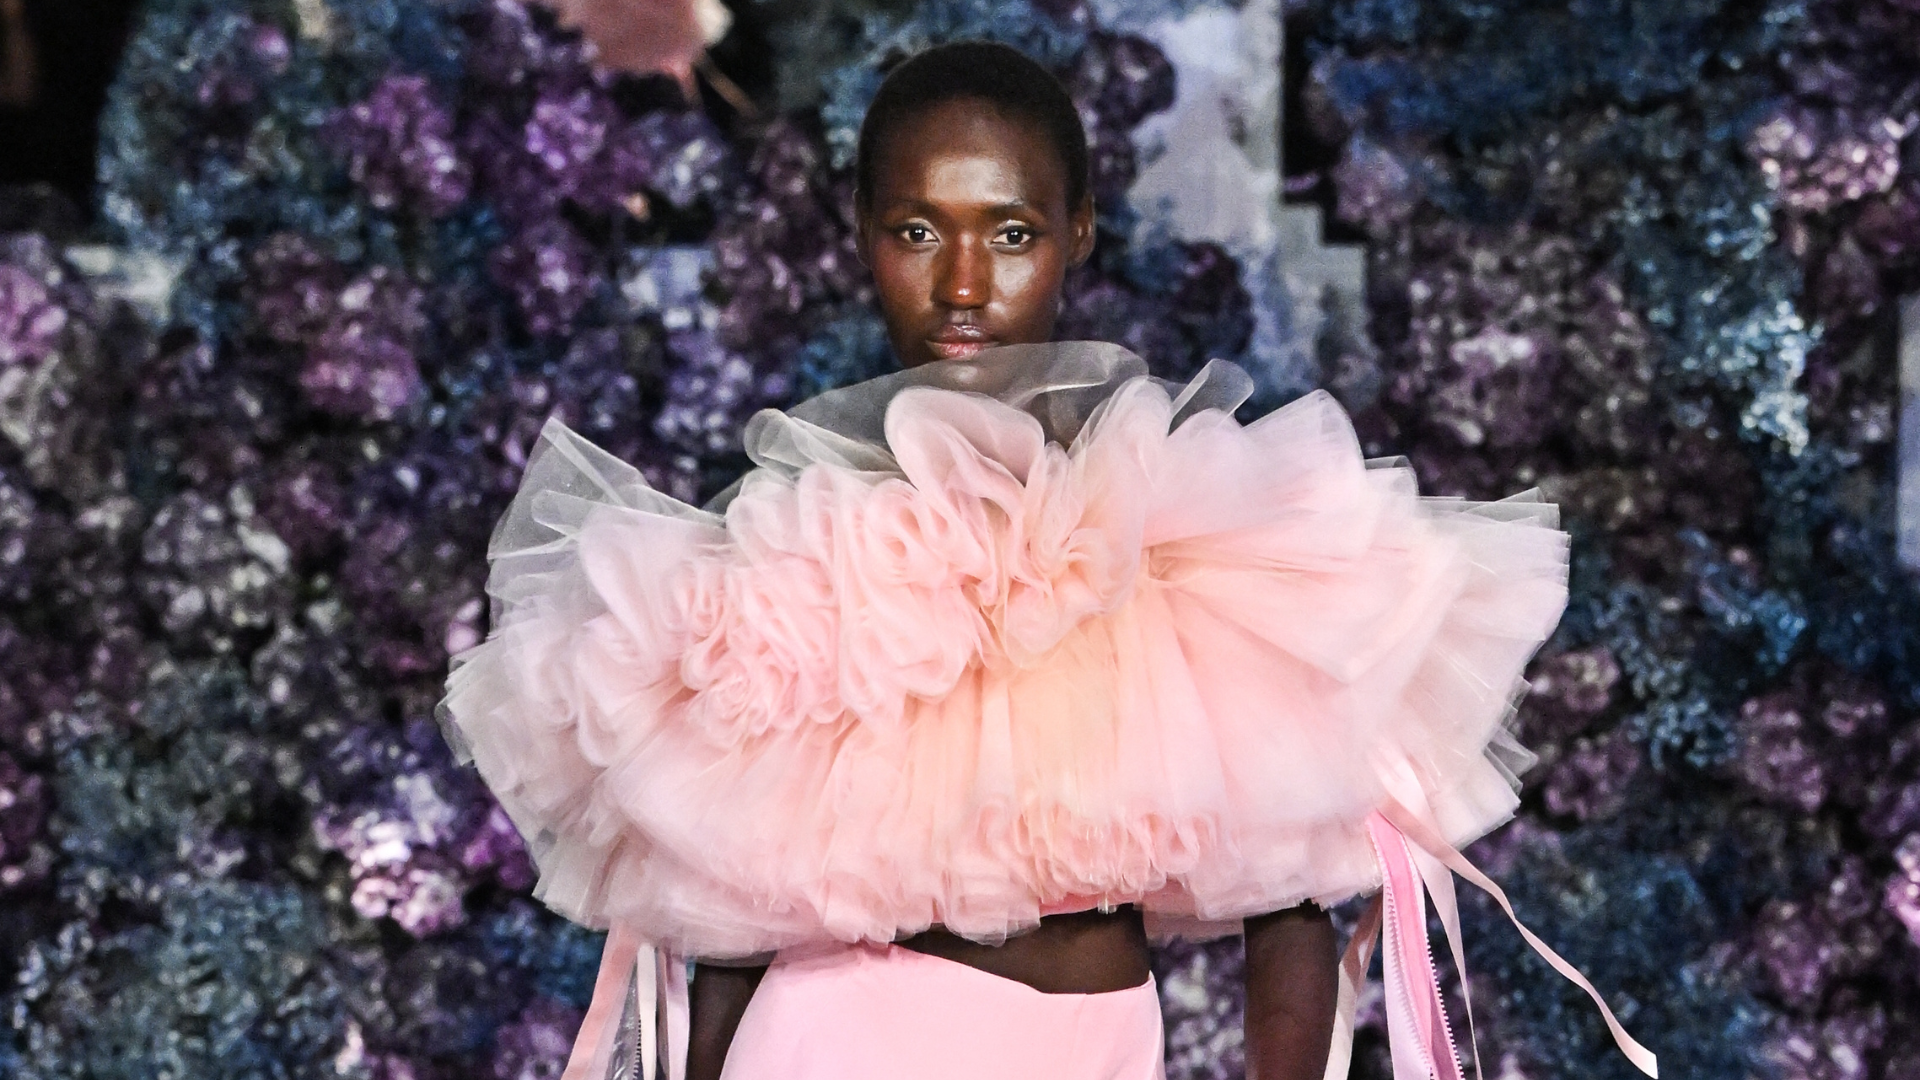 Christian Siriano Takes Balletcore To Fantastical New Heights